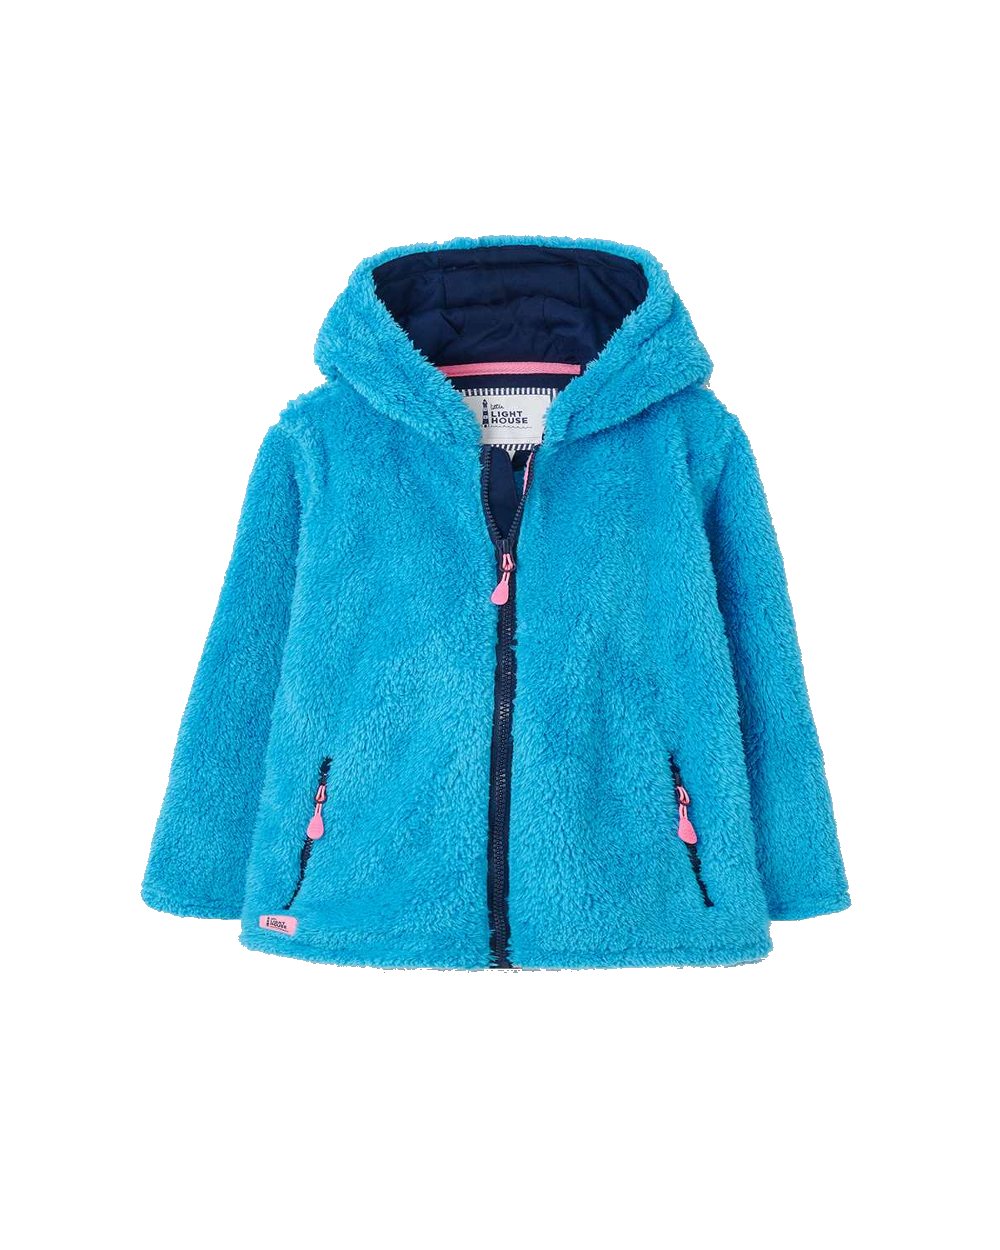 Lighthouse Gracie Girls Fleece in Bright Teal 